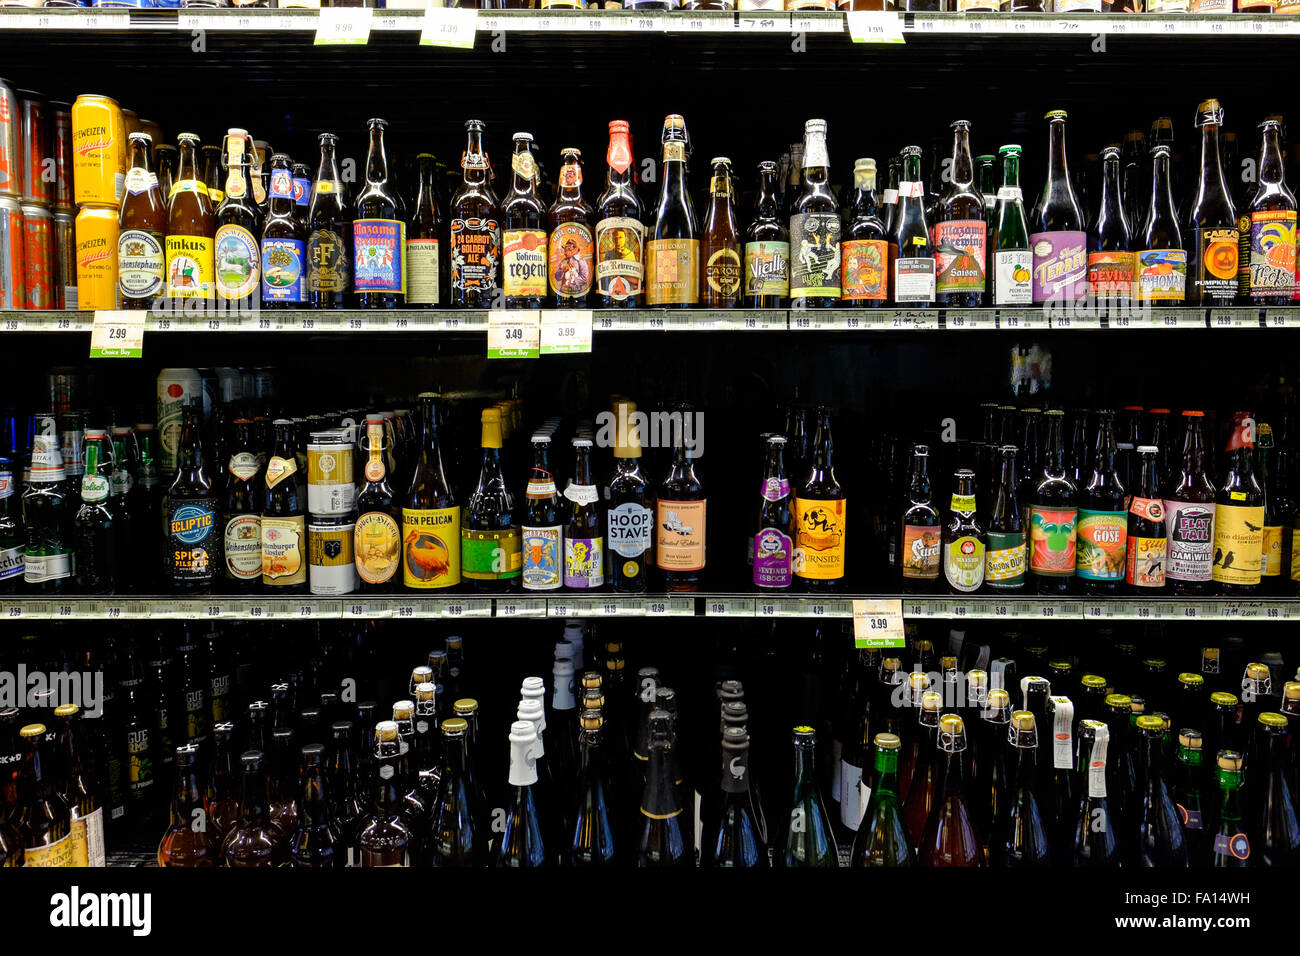 EUGENE, OR - DECEMBER 16, 2015: Beer selection in an open cooler at Market of Choice. Stock Photo